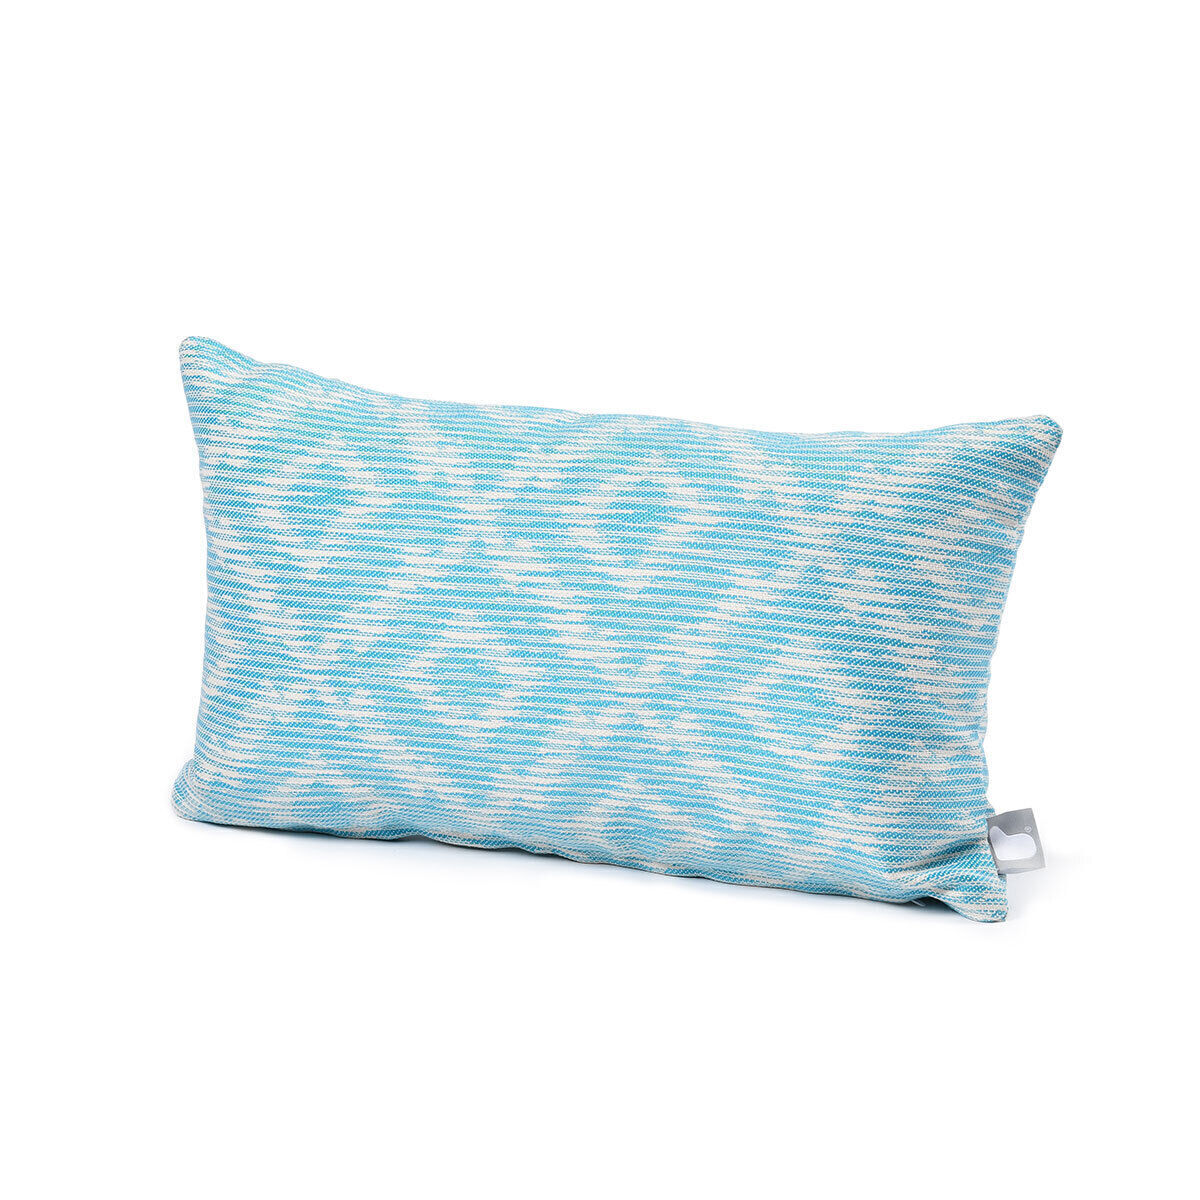 Maze - Pair of Outdoor Bolster Cushions (30x50cm) - Santorini Blue product image